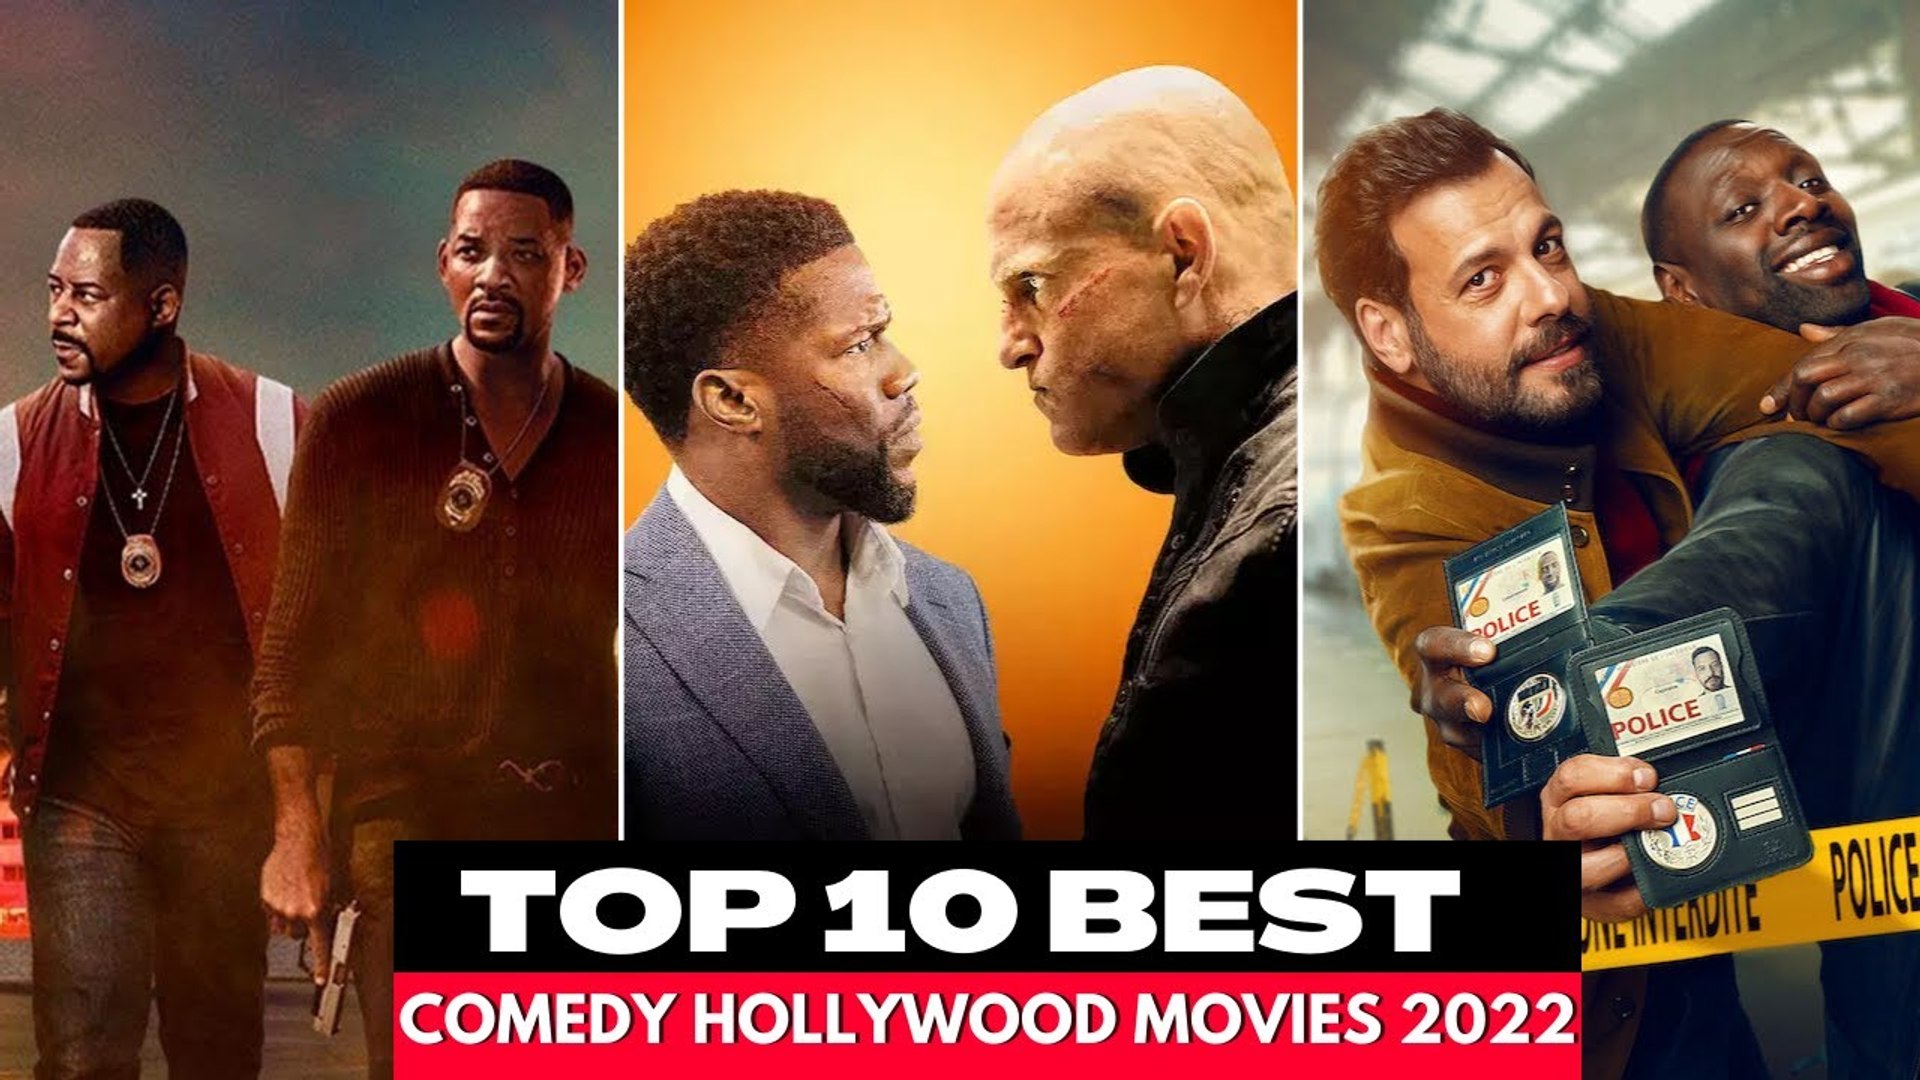 Top 10 Comedy Based Hollywood Movies That You Must Watch Netflix, Amazon HBO Max in 2022 - video